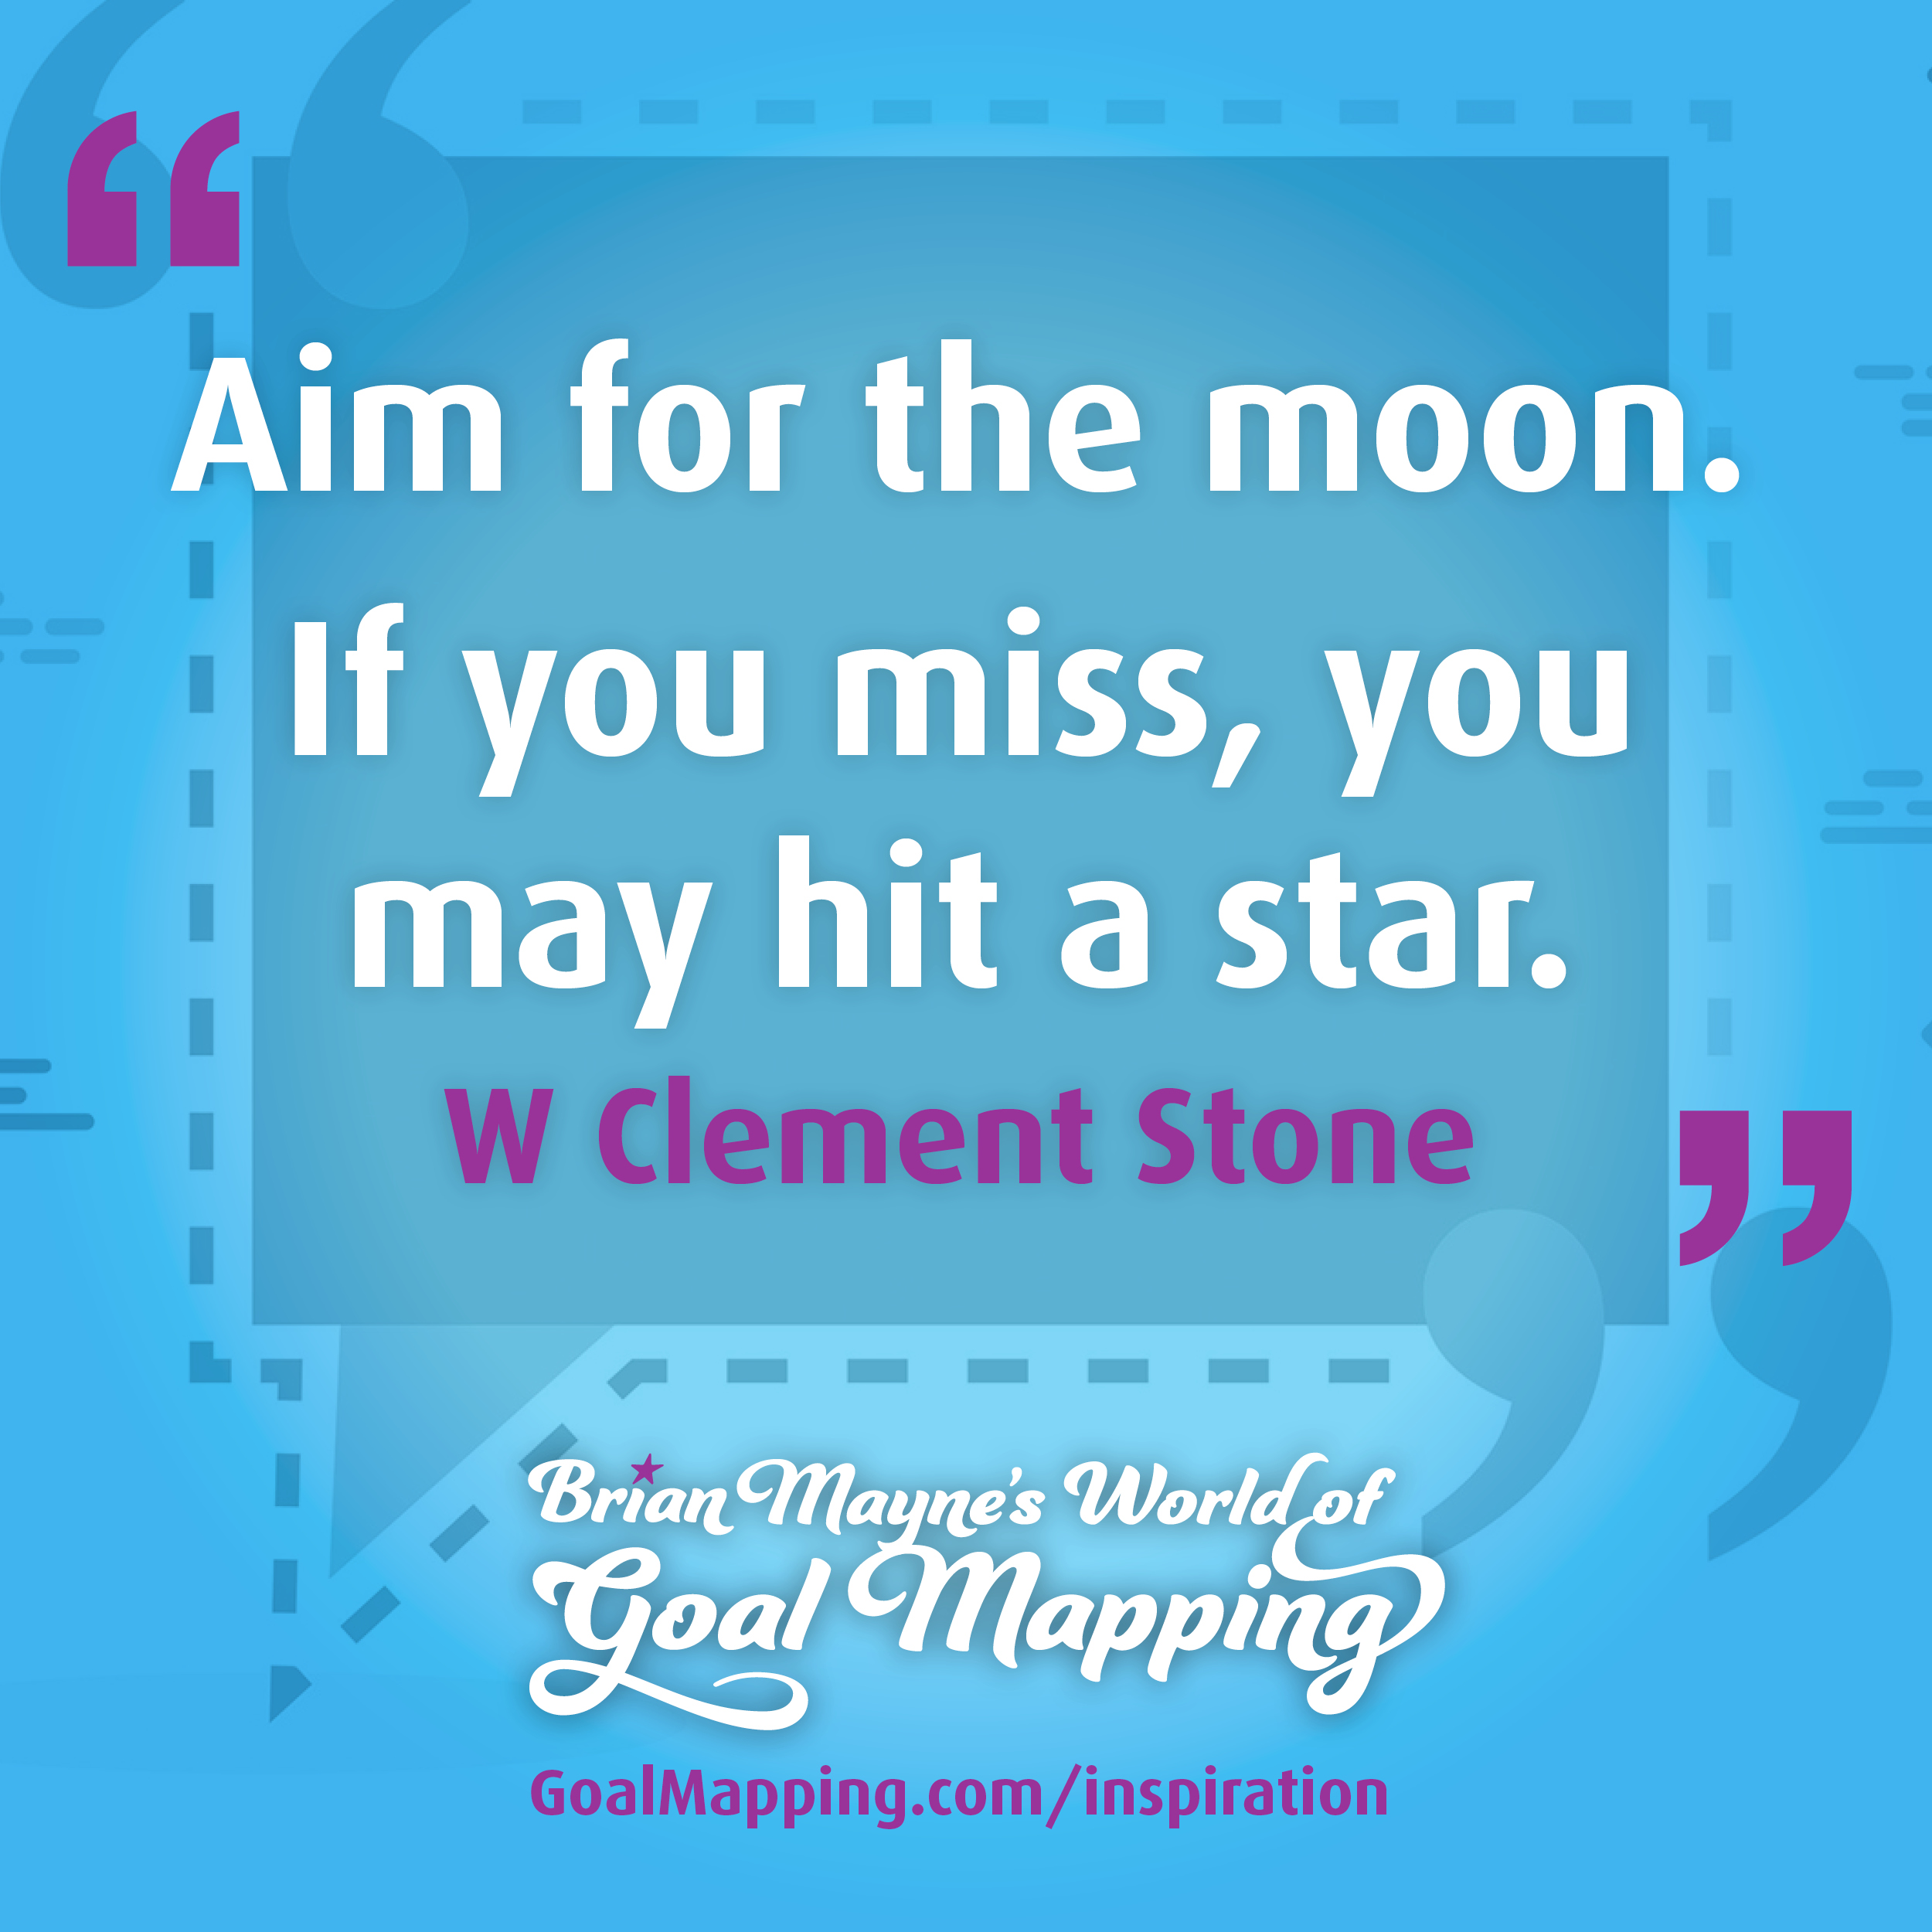 "Aim for the moon. If you miss, you may hit a star." W Clement Stone